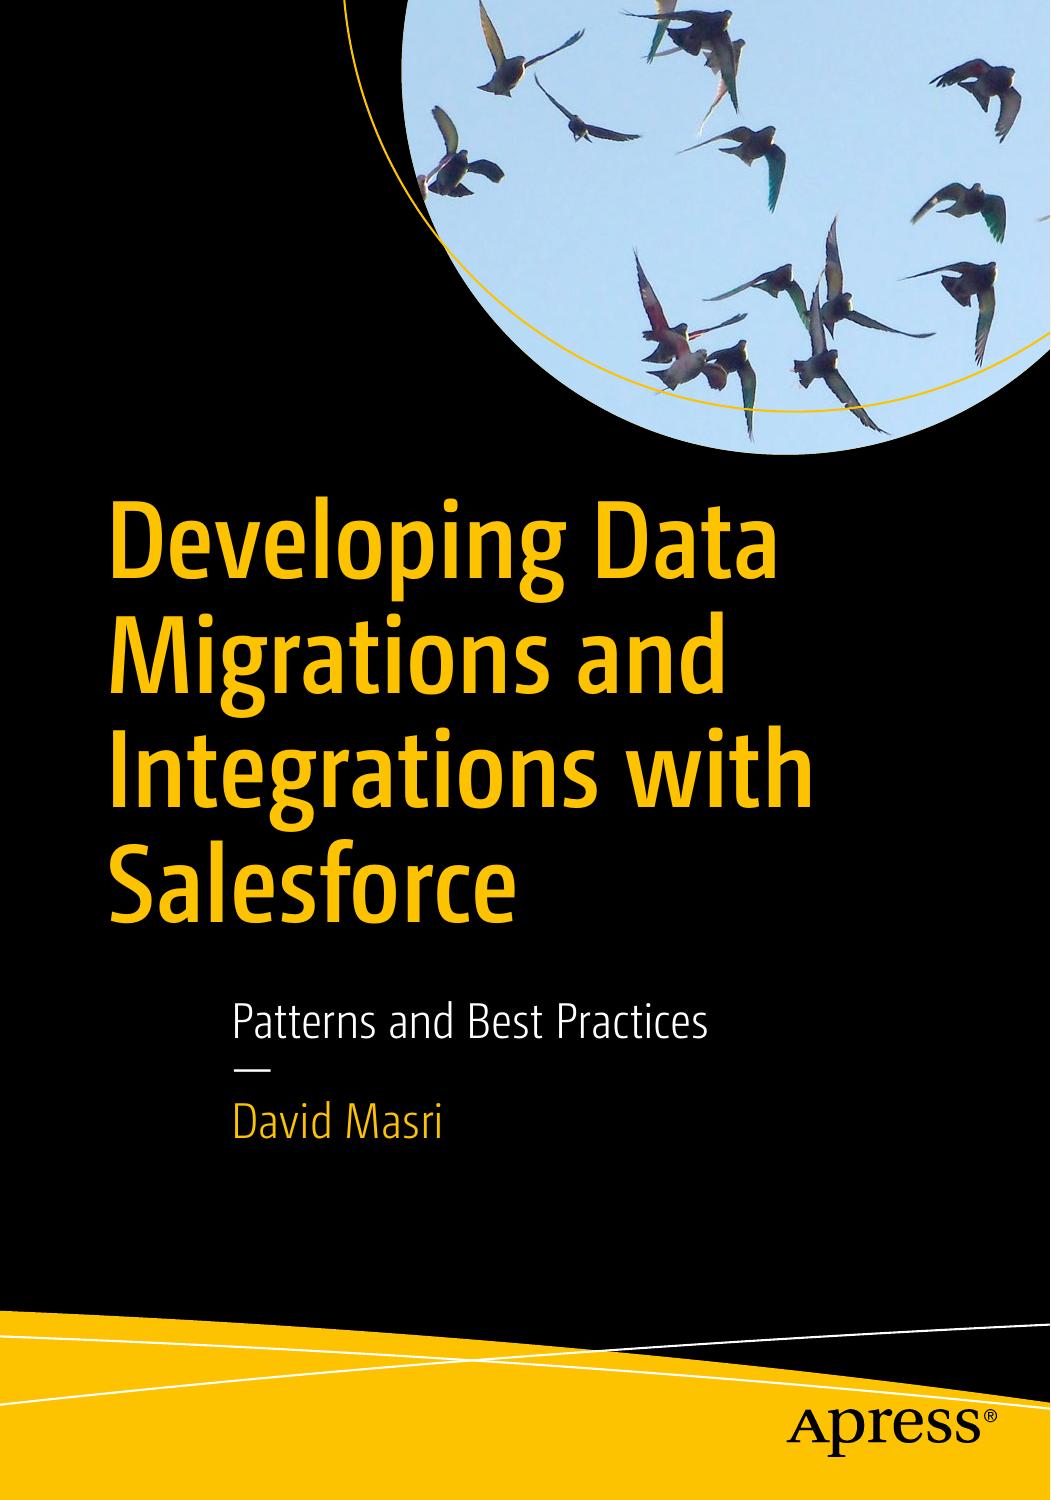 Developing Data Migrations and Integrations with Salesforce Patterns and Best Practices 2019 PDF